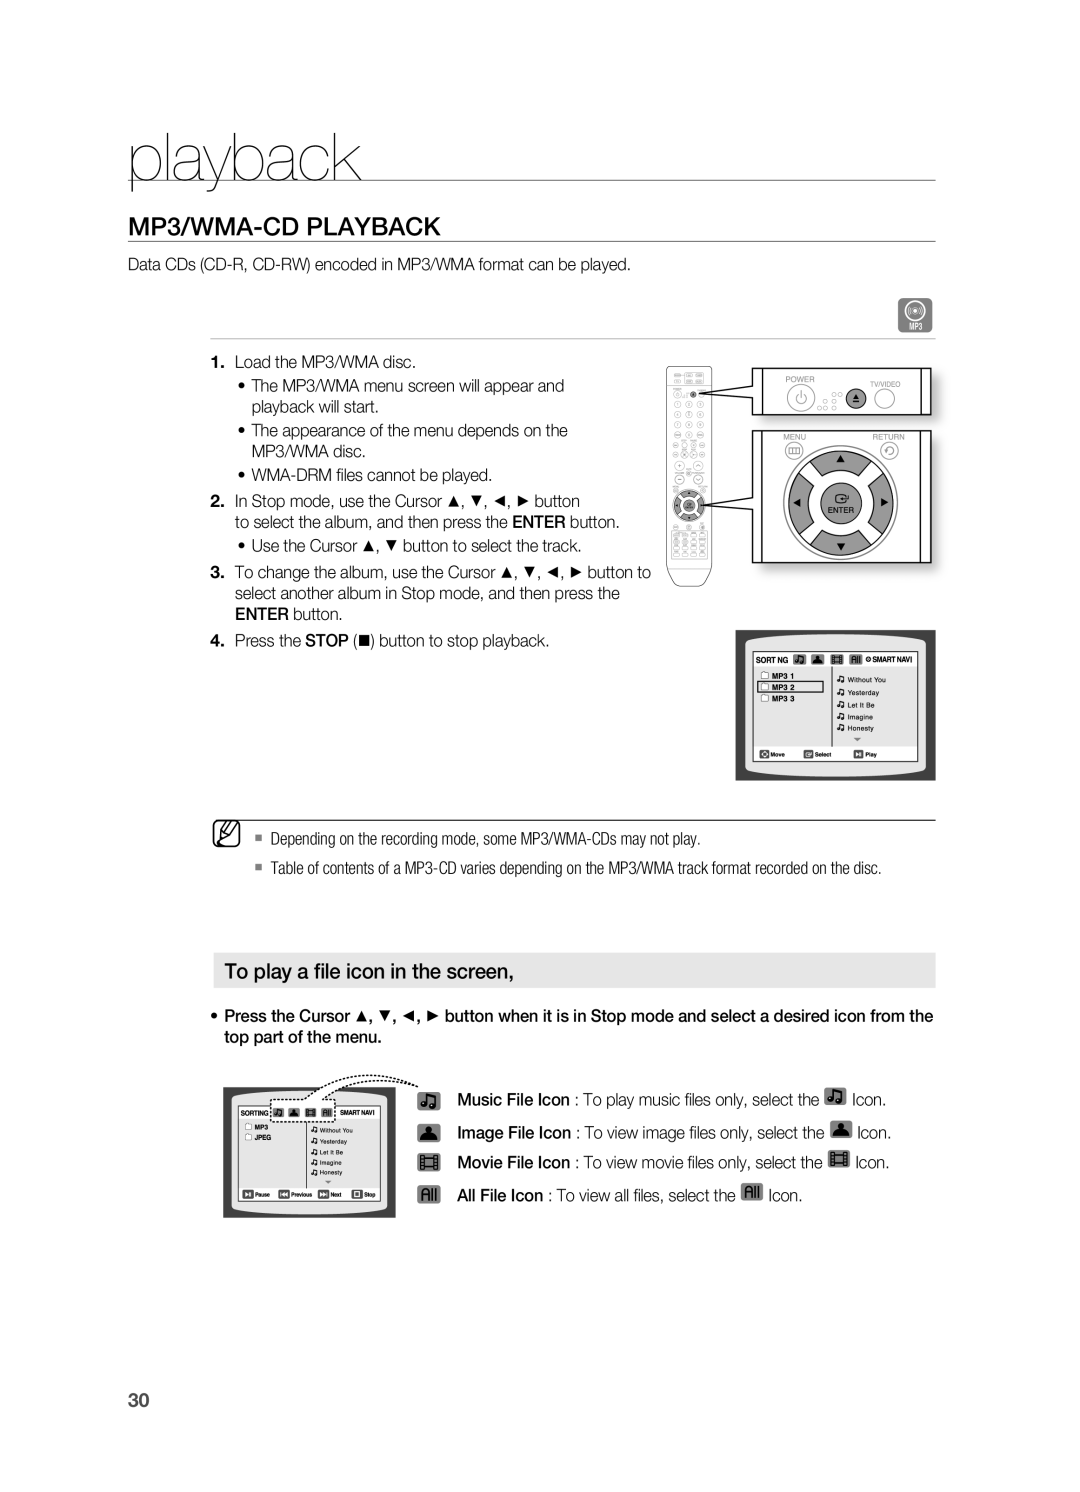 Samsung HT-TX715 user manual MP3/WMA-CDPLAYBACK, playback, To play a file icon in the screen 